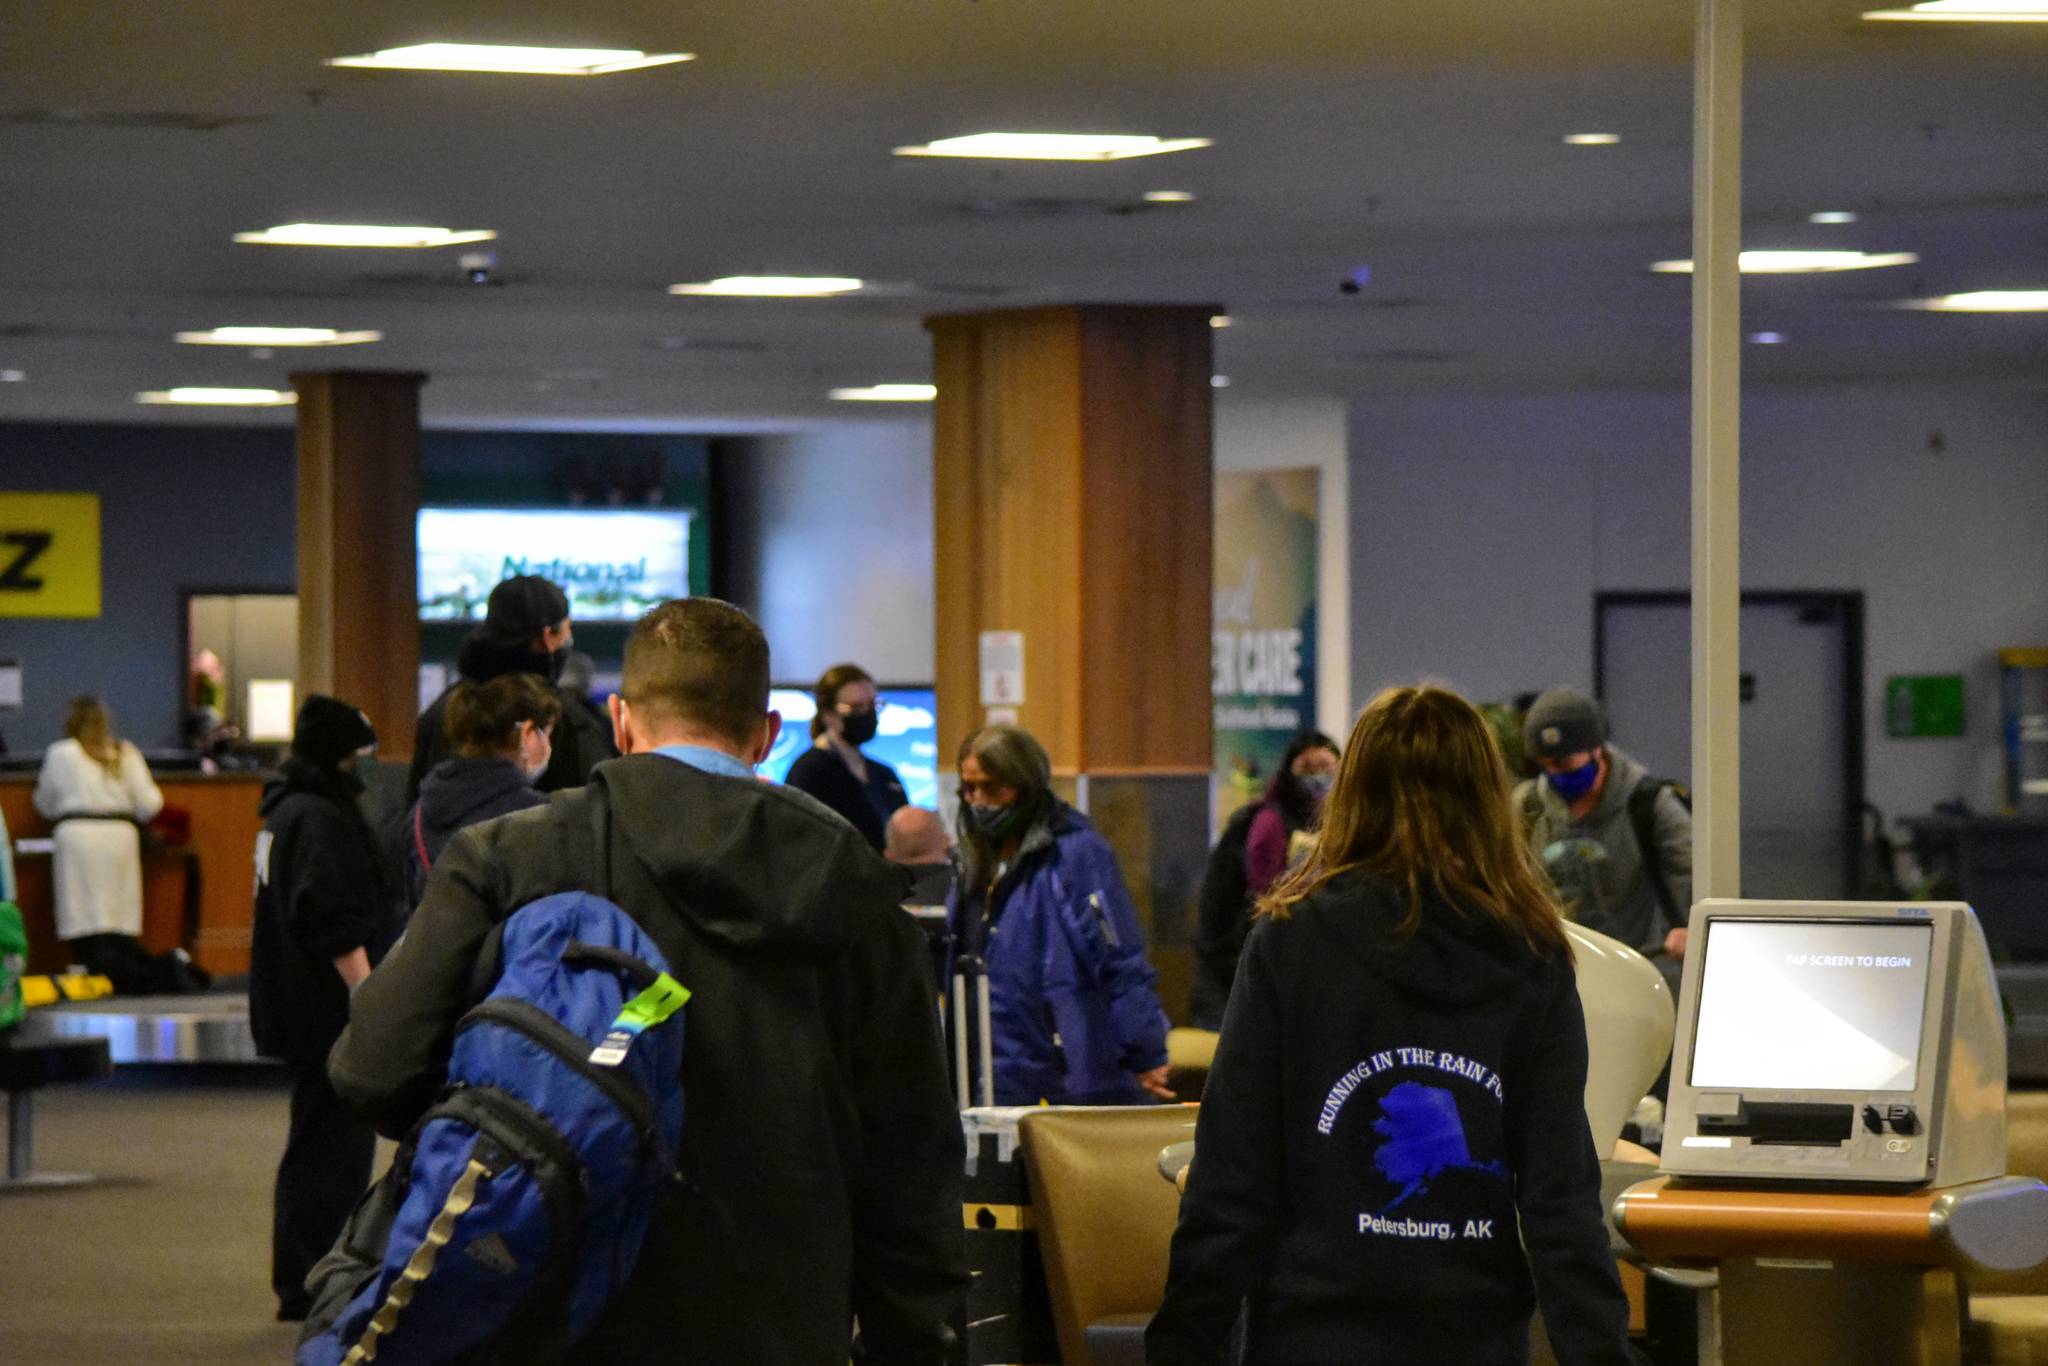 Travelers arrive at the Juneau International Airport on Wednesday, Nov. 25, 2020, made up only about half of what the airport normally sees in the days leading up to the Thanksgiving holiday. (Peter Segall / Juneau Empire)